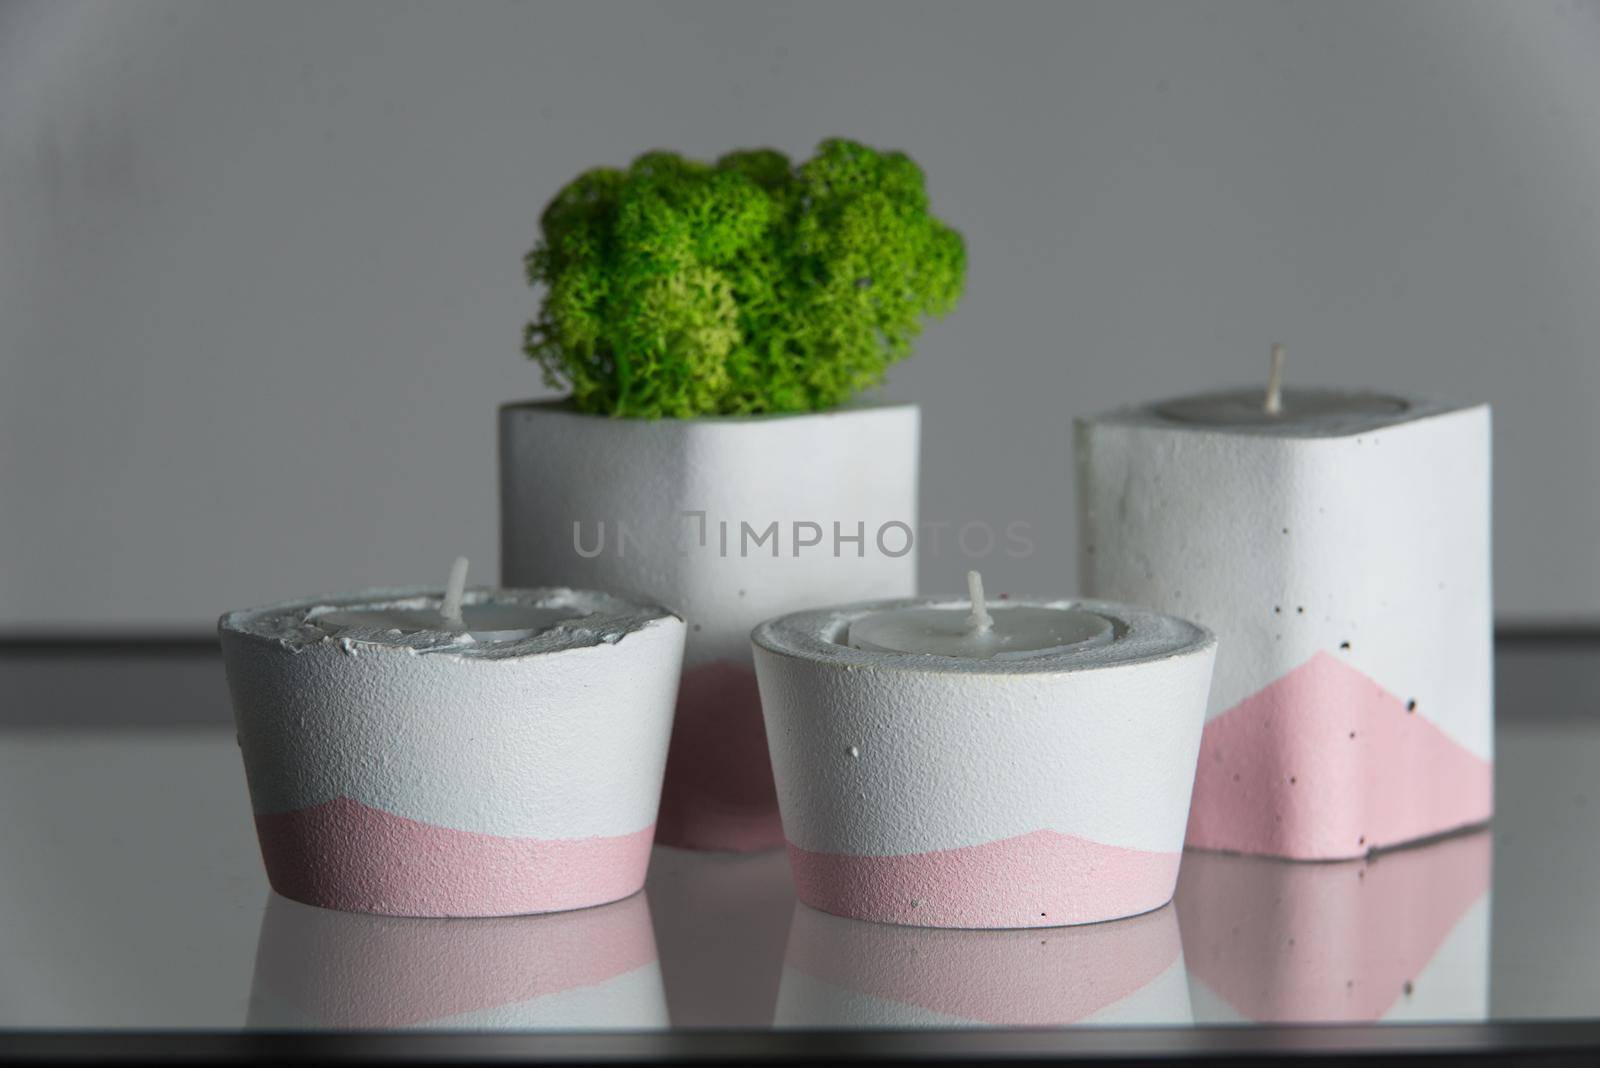 candles and moss in white and pink concrete candle holders by Ashtray25